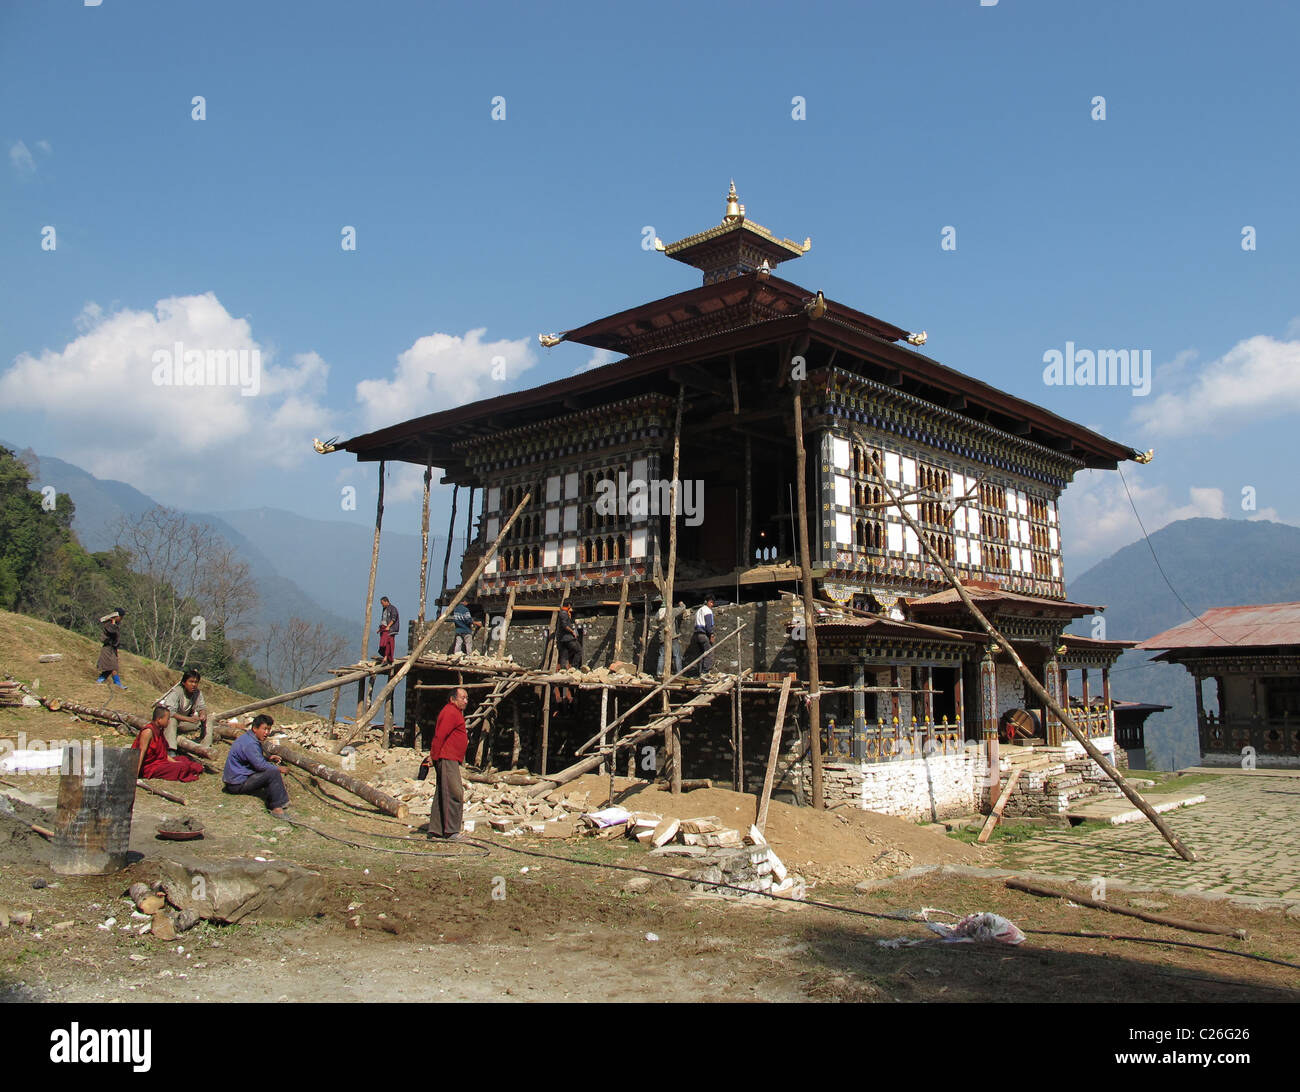 Monastery being restored after an earthquake, East Bhutan, between Mongar and Trashigang Stock Photo